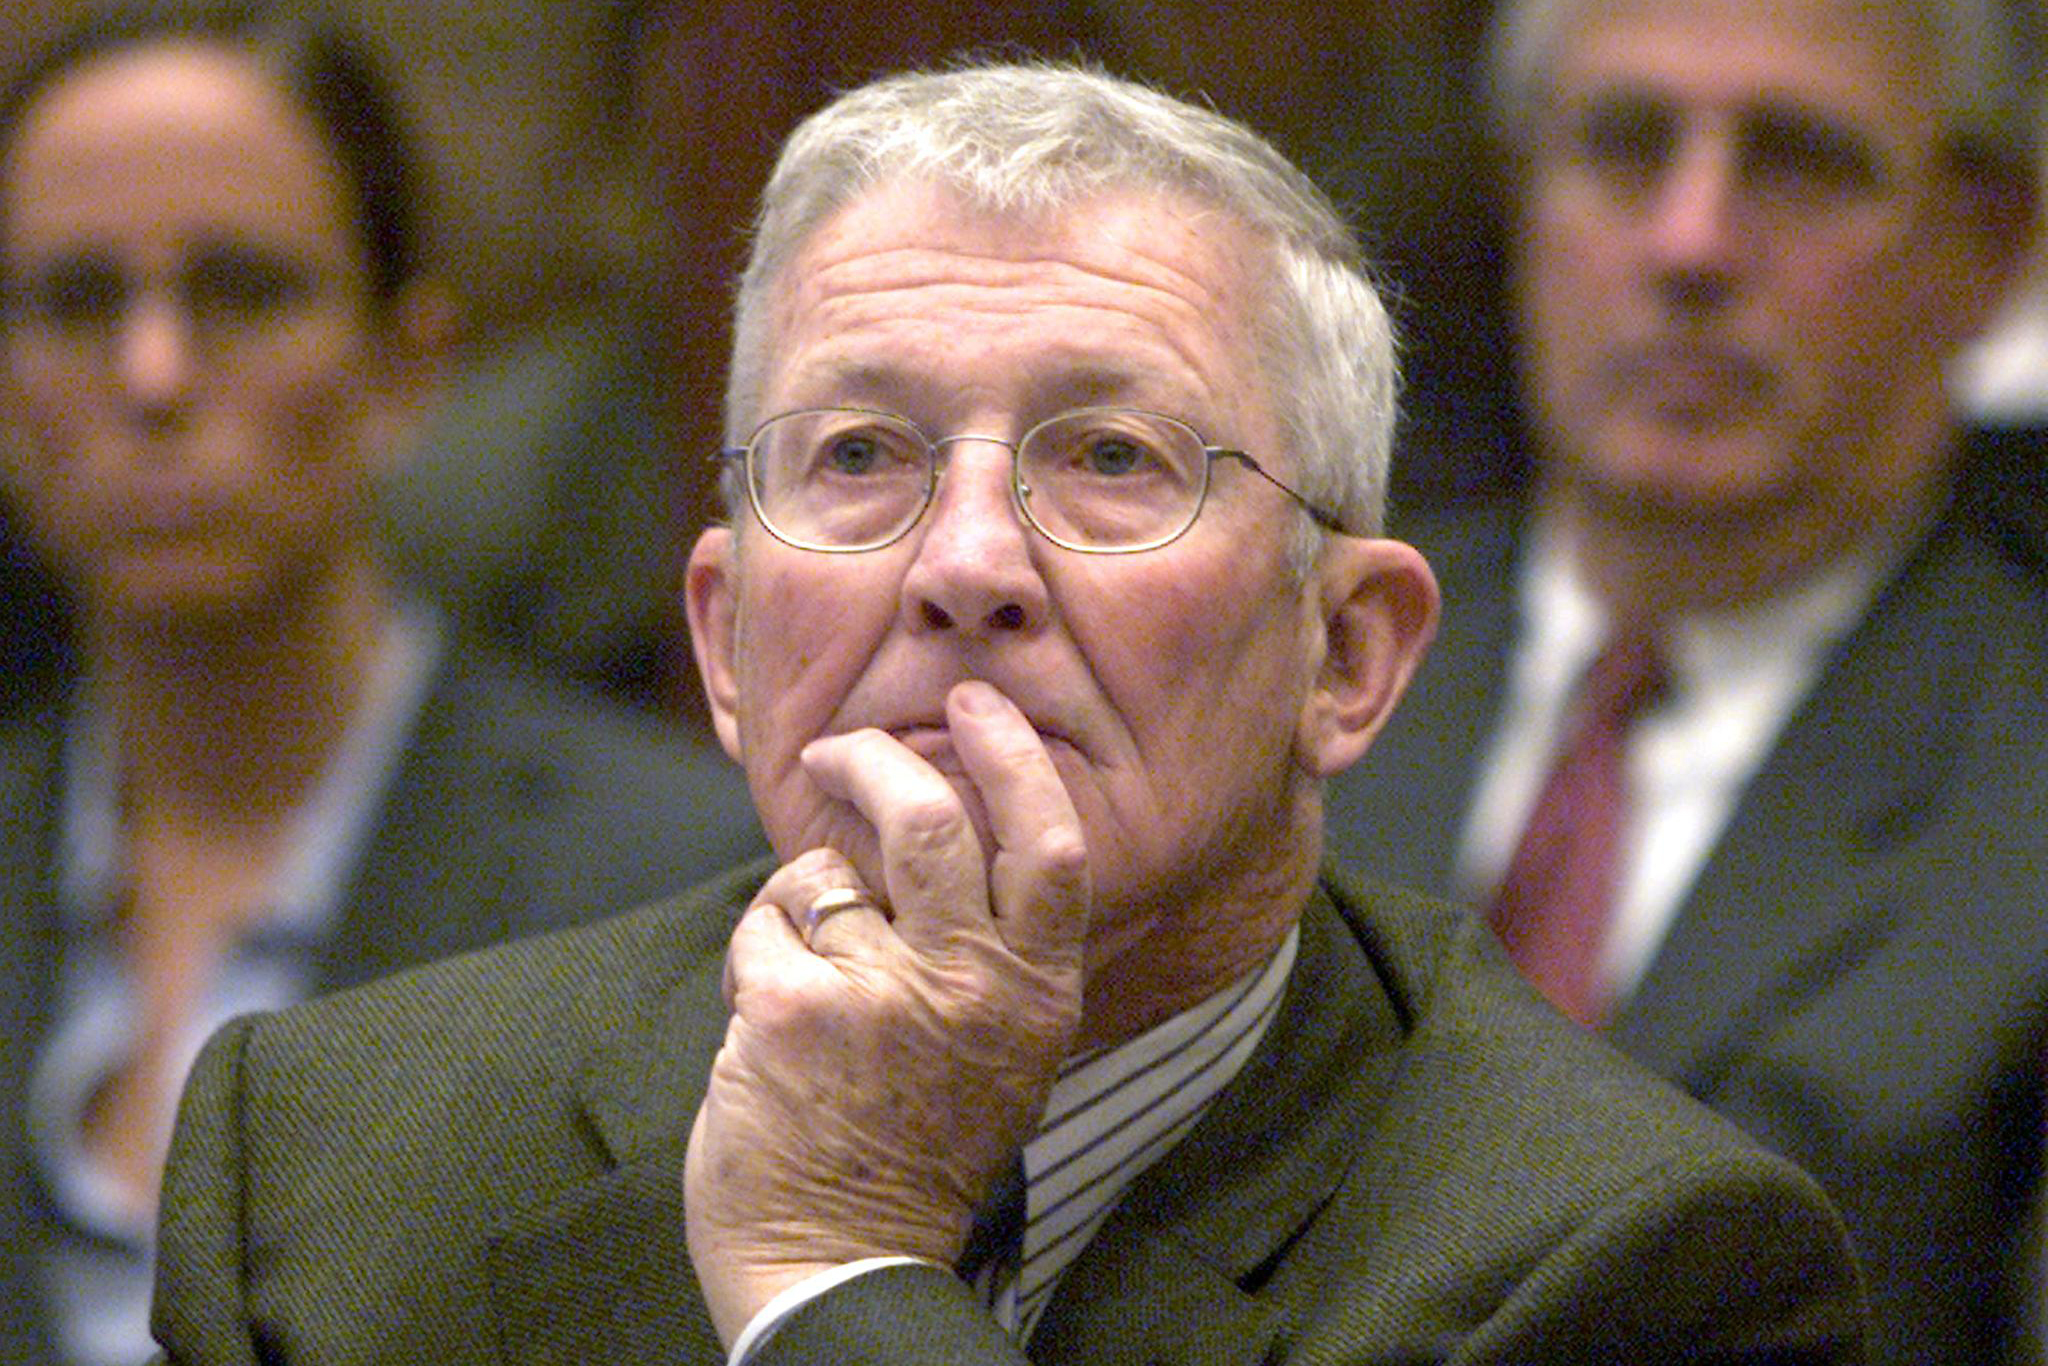 An older man with glasses, in a suit, thoughtfully rests his chin on his hand. Two blurred figures are behind him.